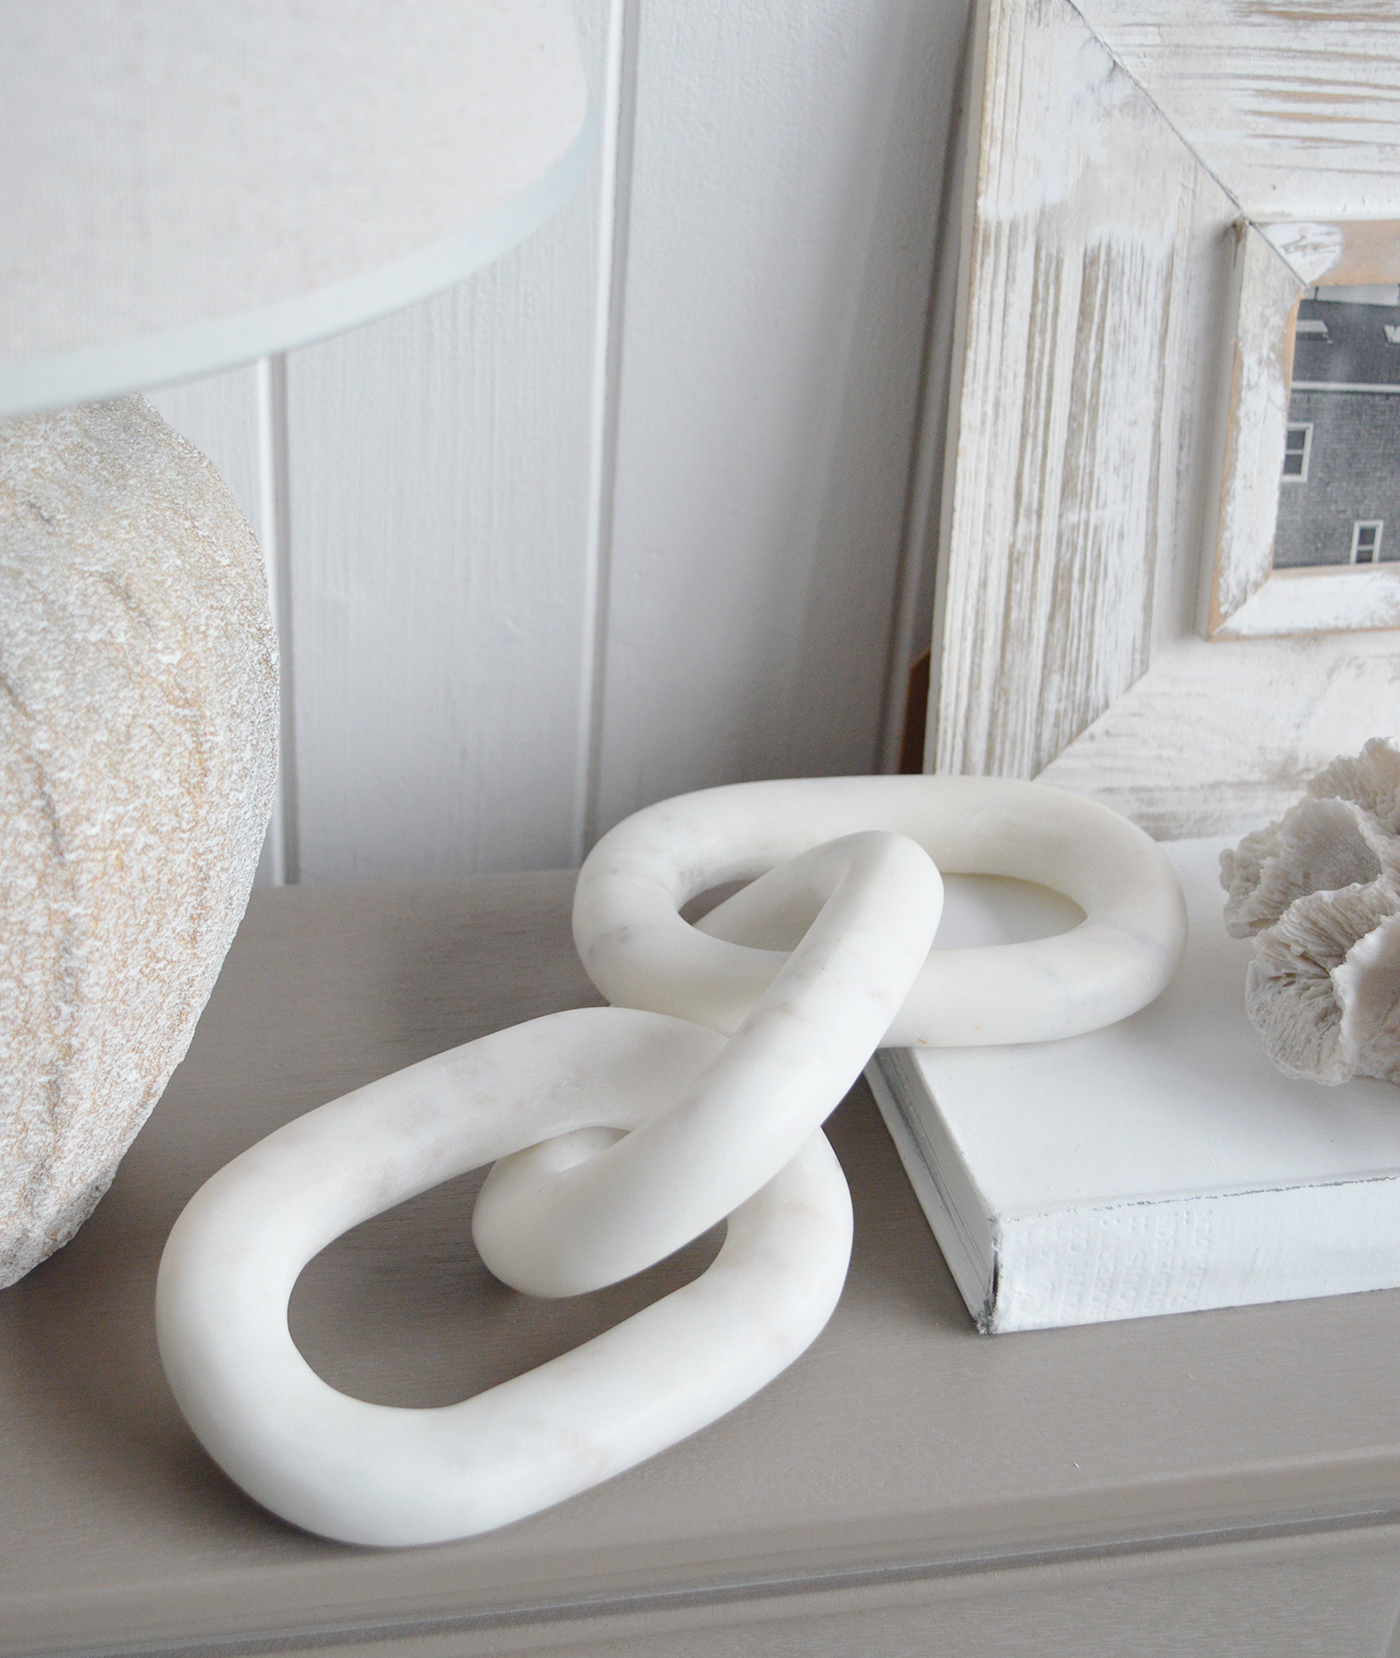 White Marble Chain - Modern Farmhouse, Country, Coastal and Hamptons styling homes and interiors